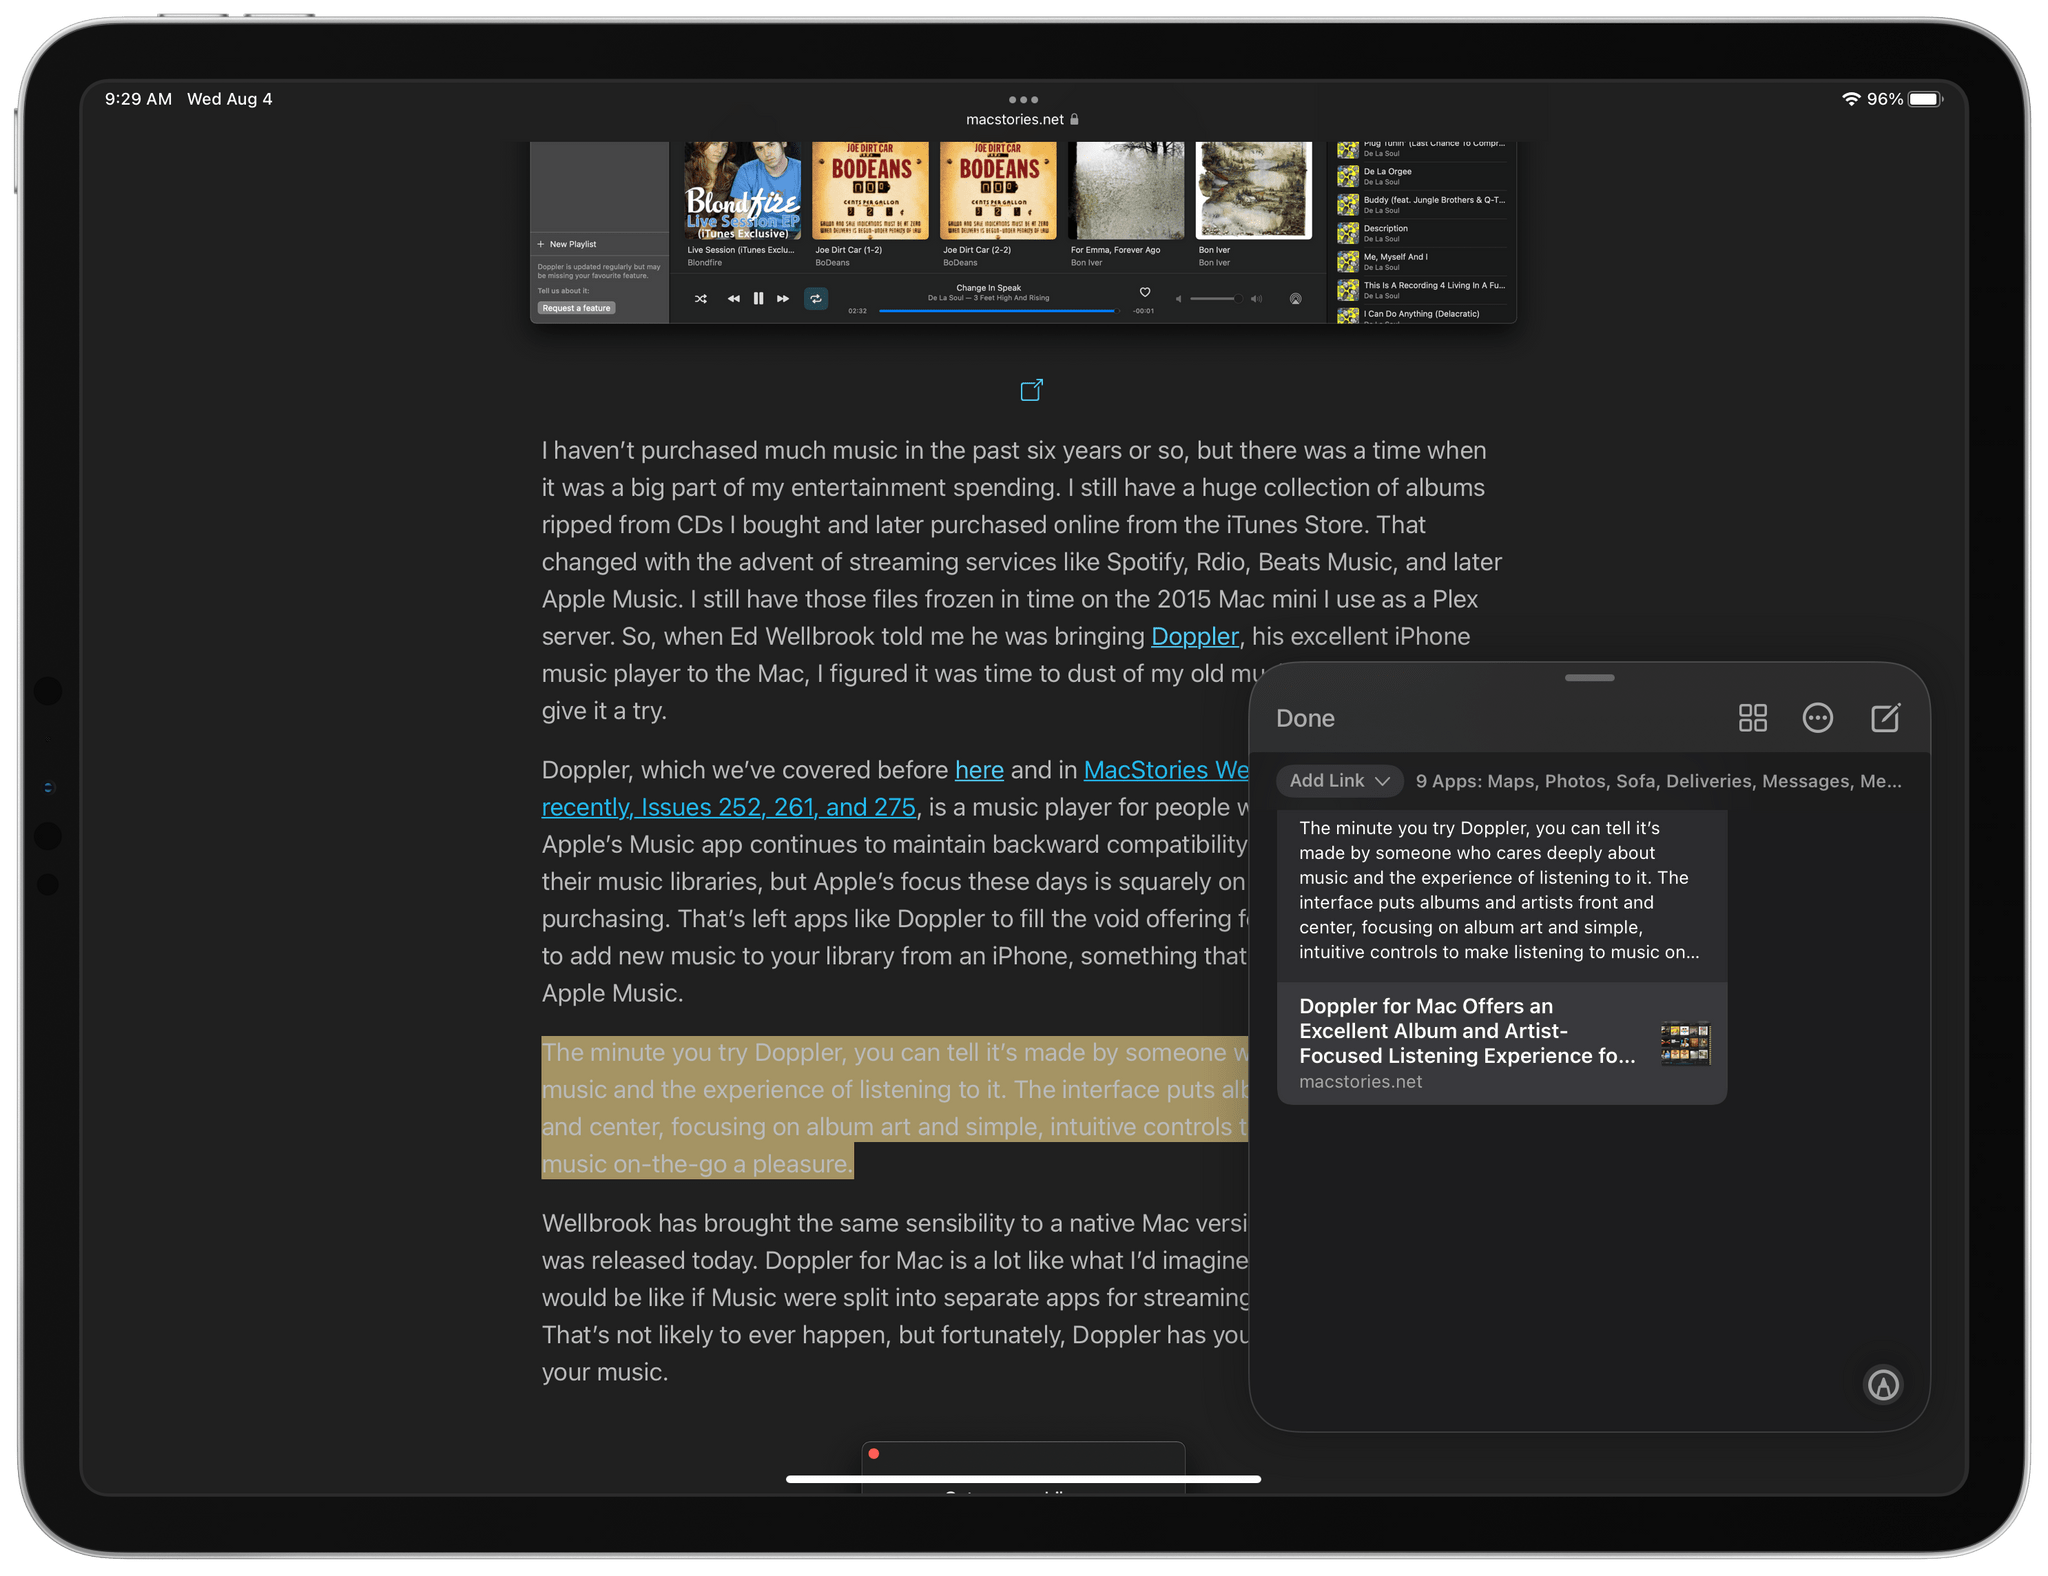 Reopening the same Quick Note on an iPad Pro.